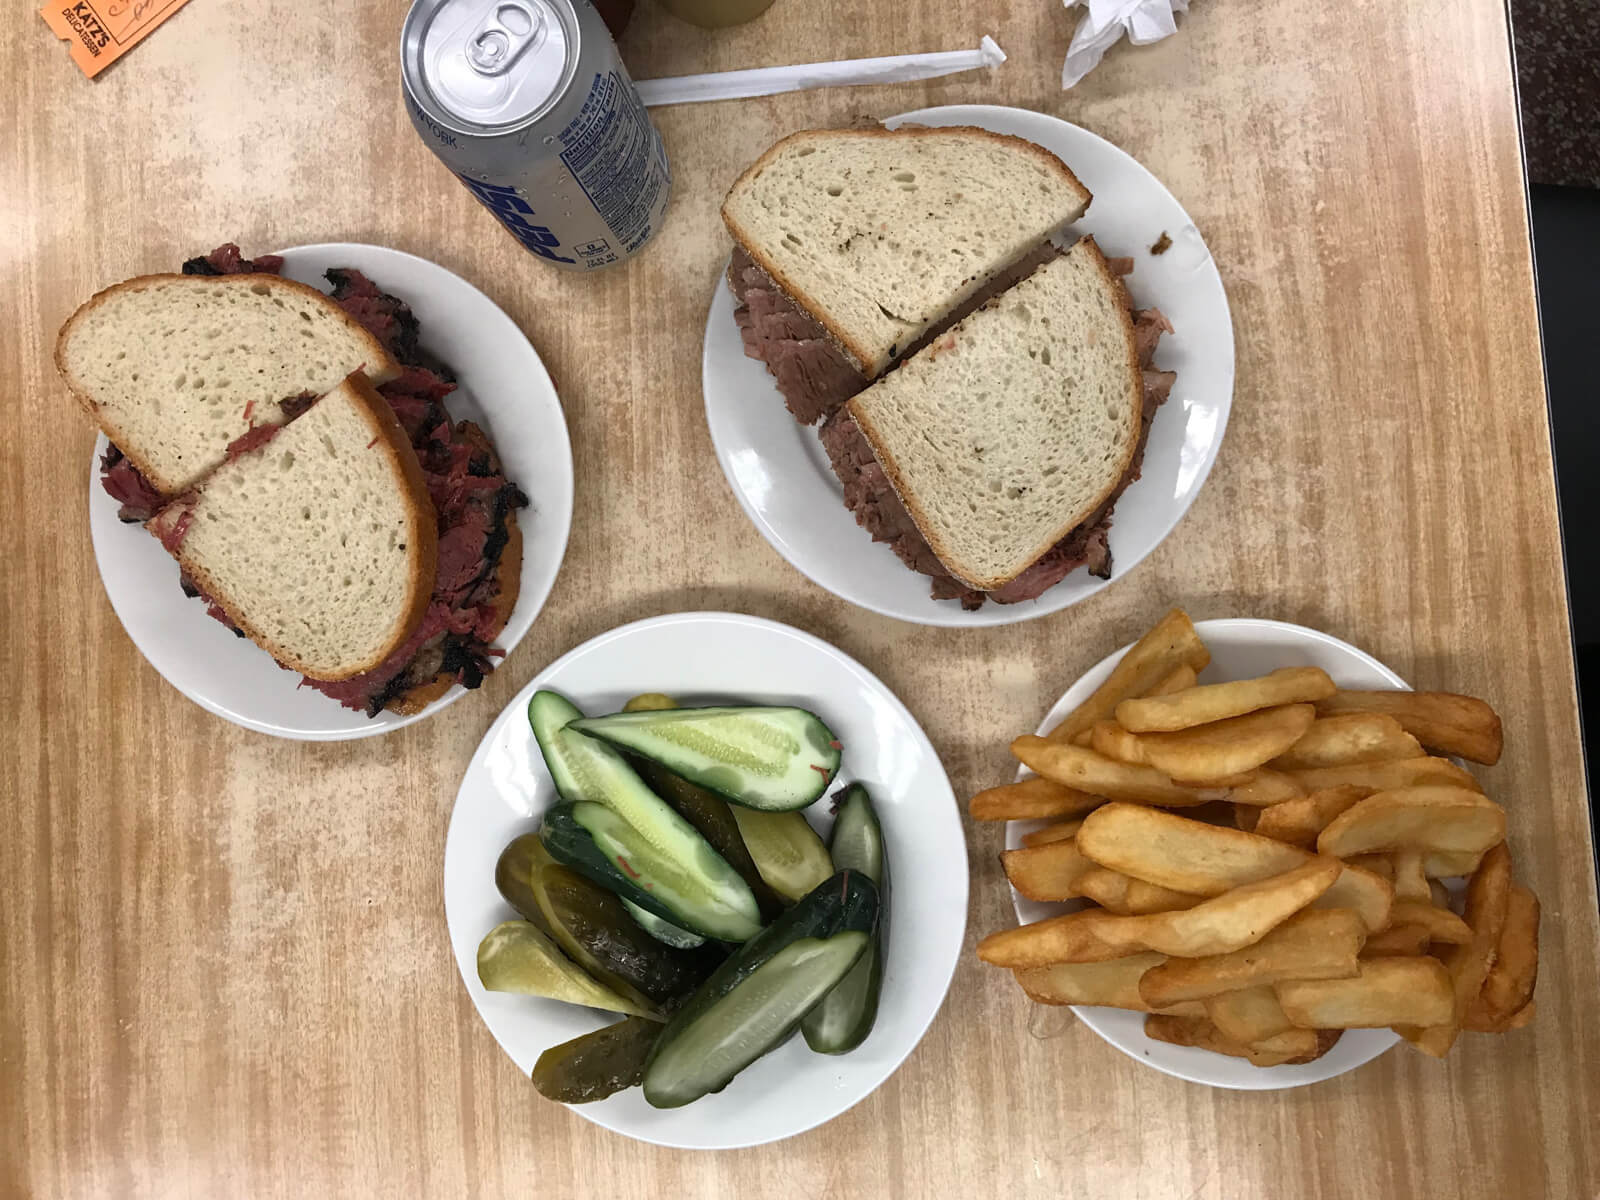 Several white plates on a wooden table â€“ two with sandwiches cut in half, one with green pickles and the other with fries. There is also a can of Pepsi on the table